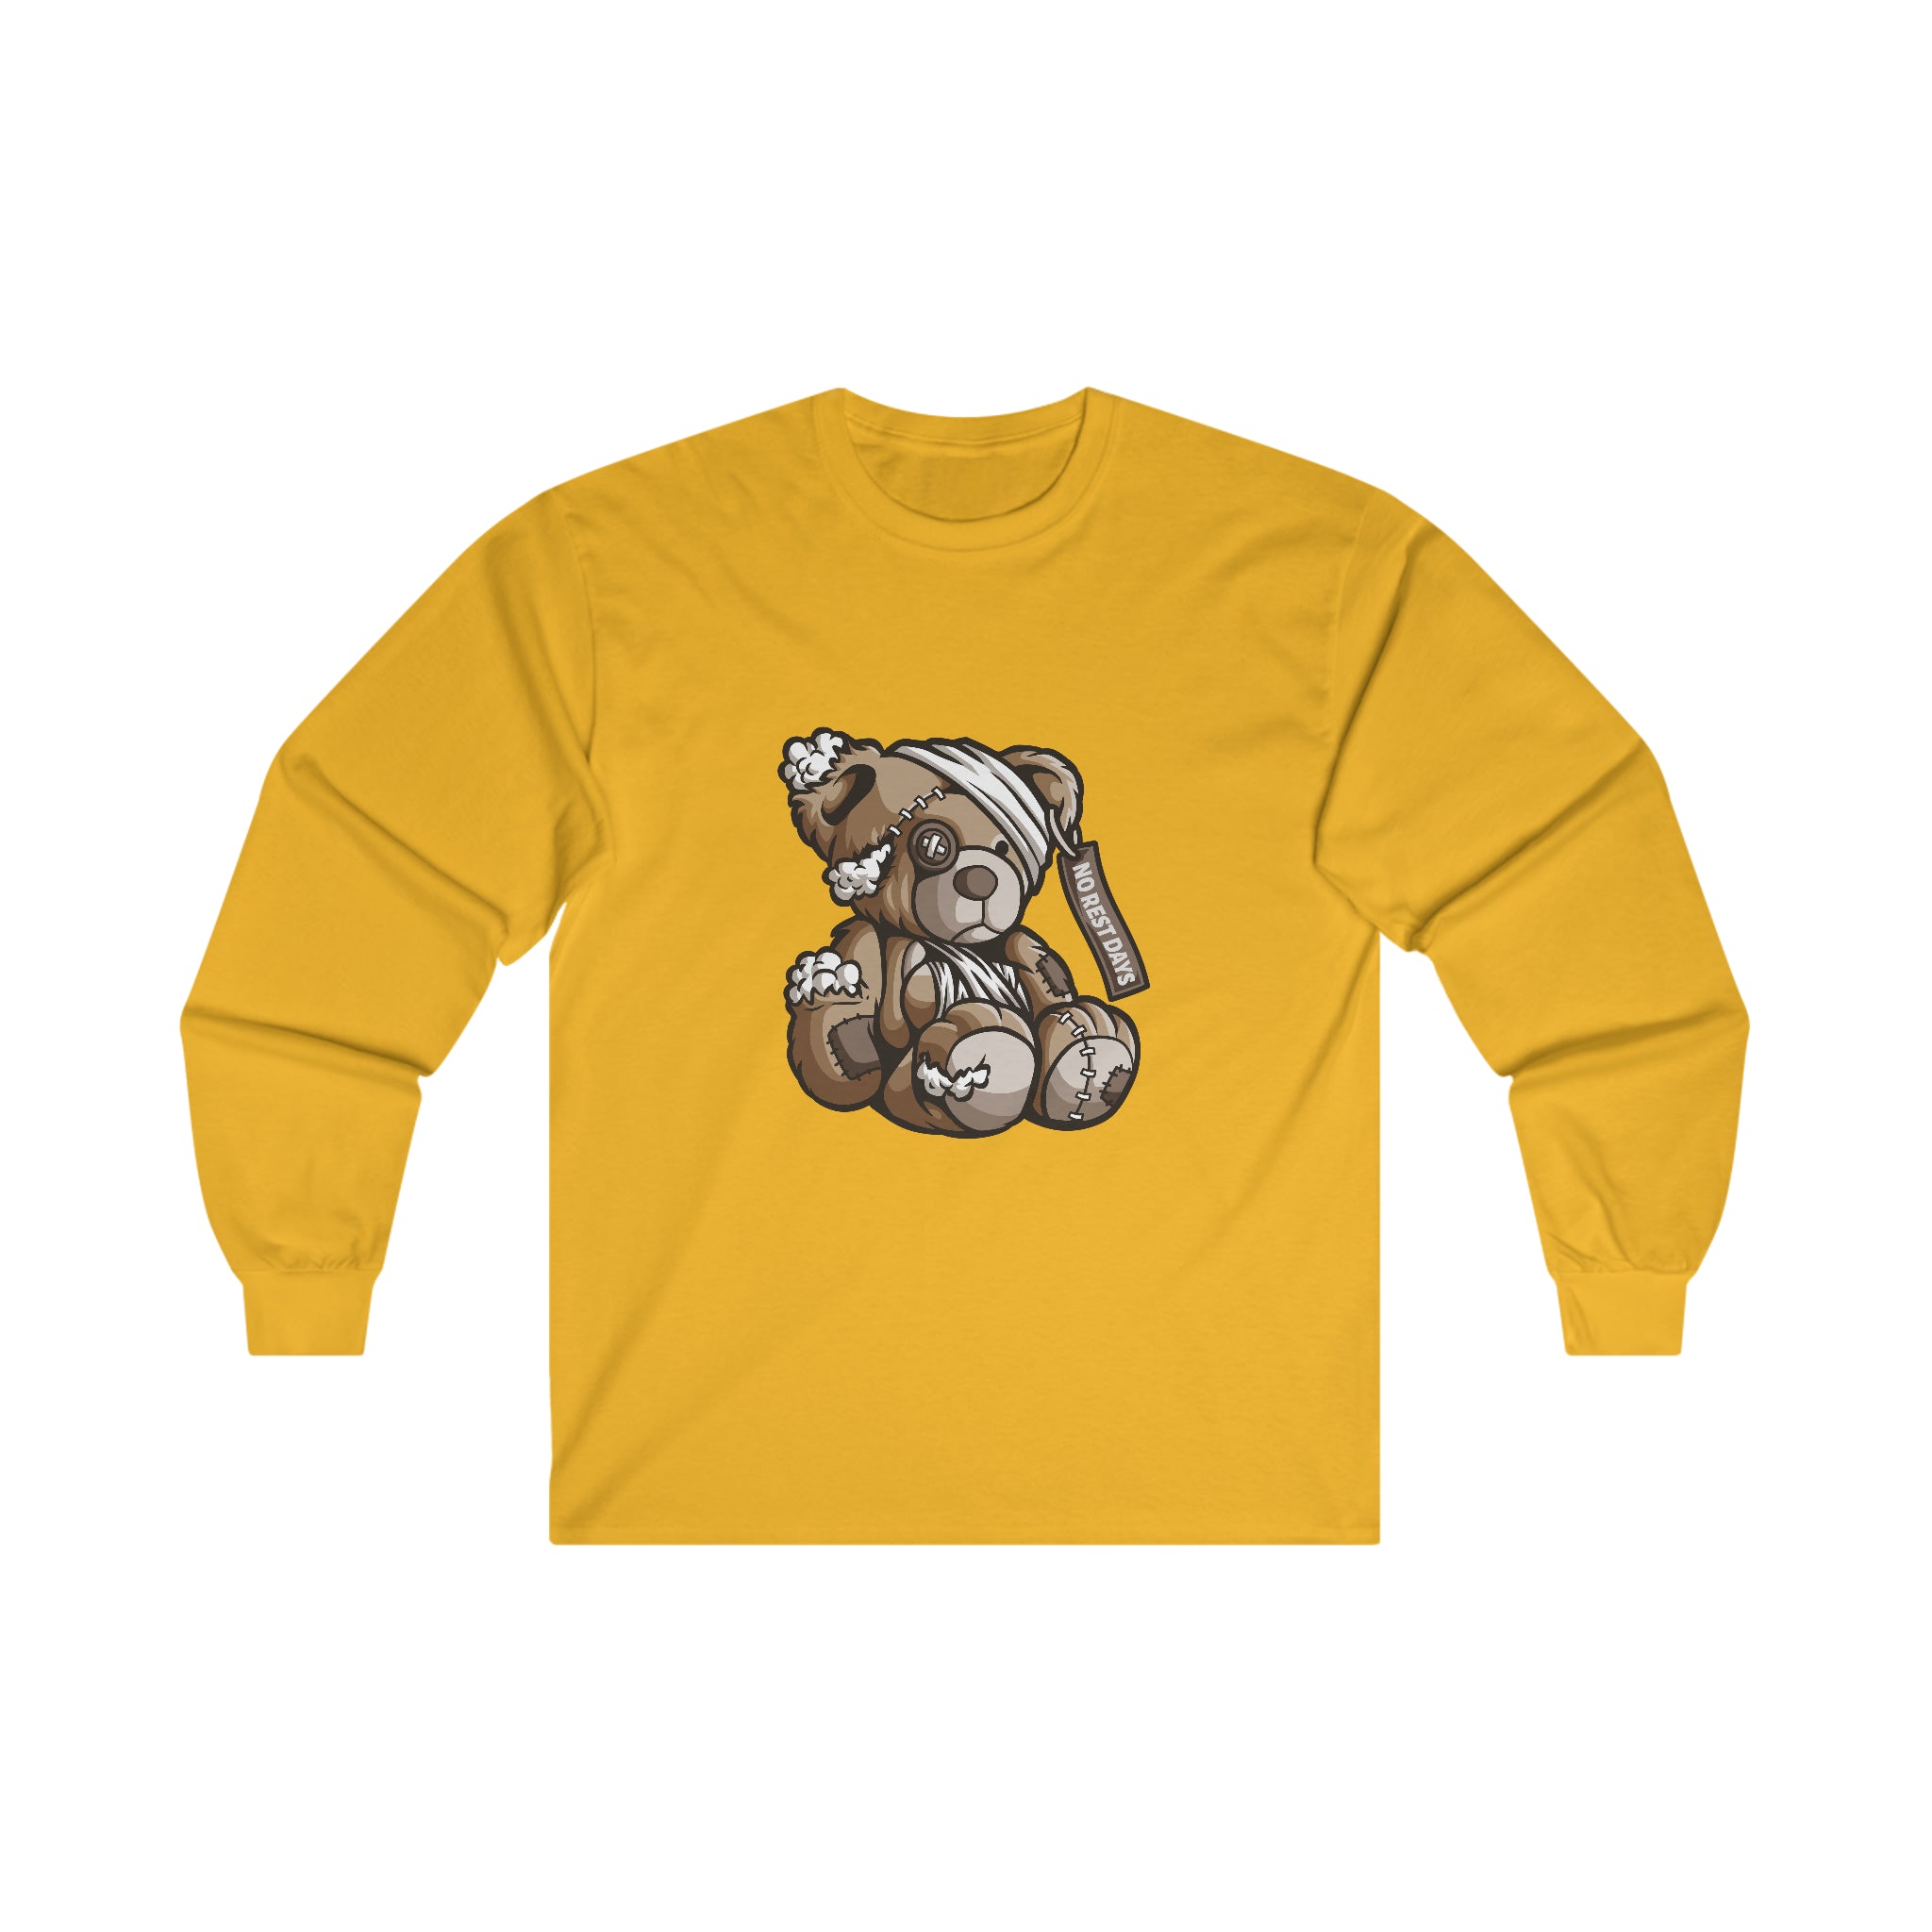 No Rest Day Long Sleeve Tee